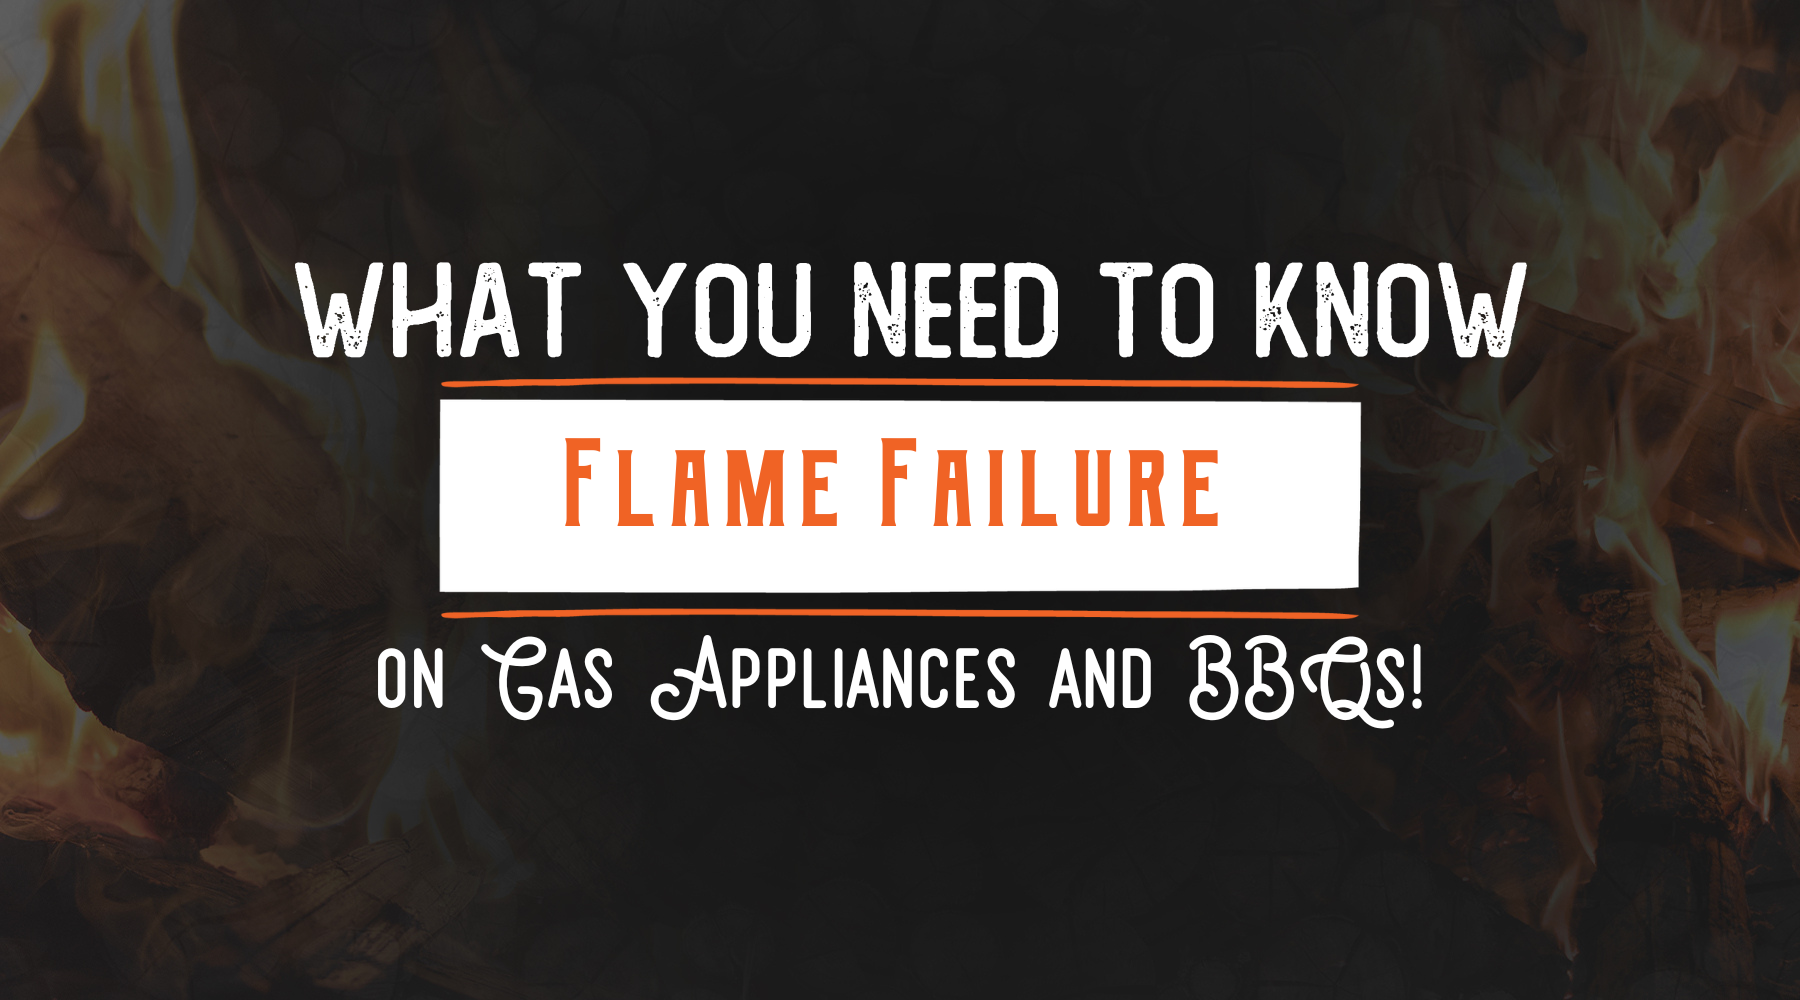 Everything You Need to Know About Flame Failure on Gas Appliances and BBQ's